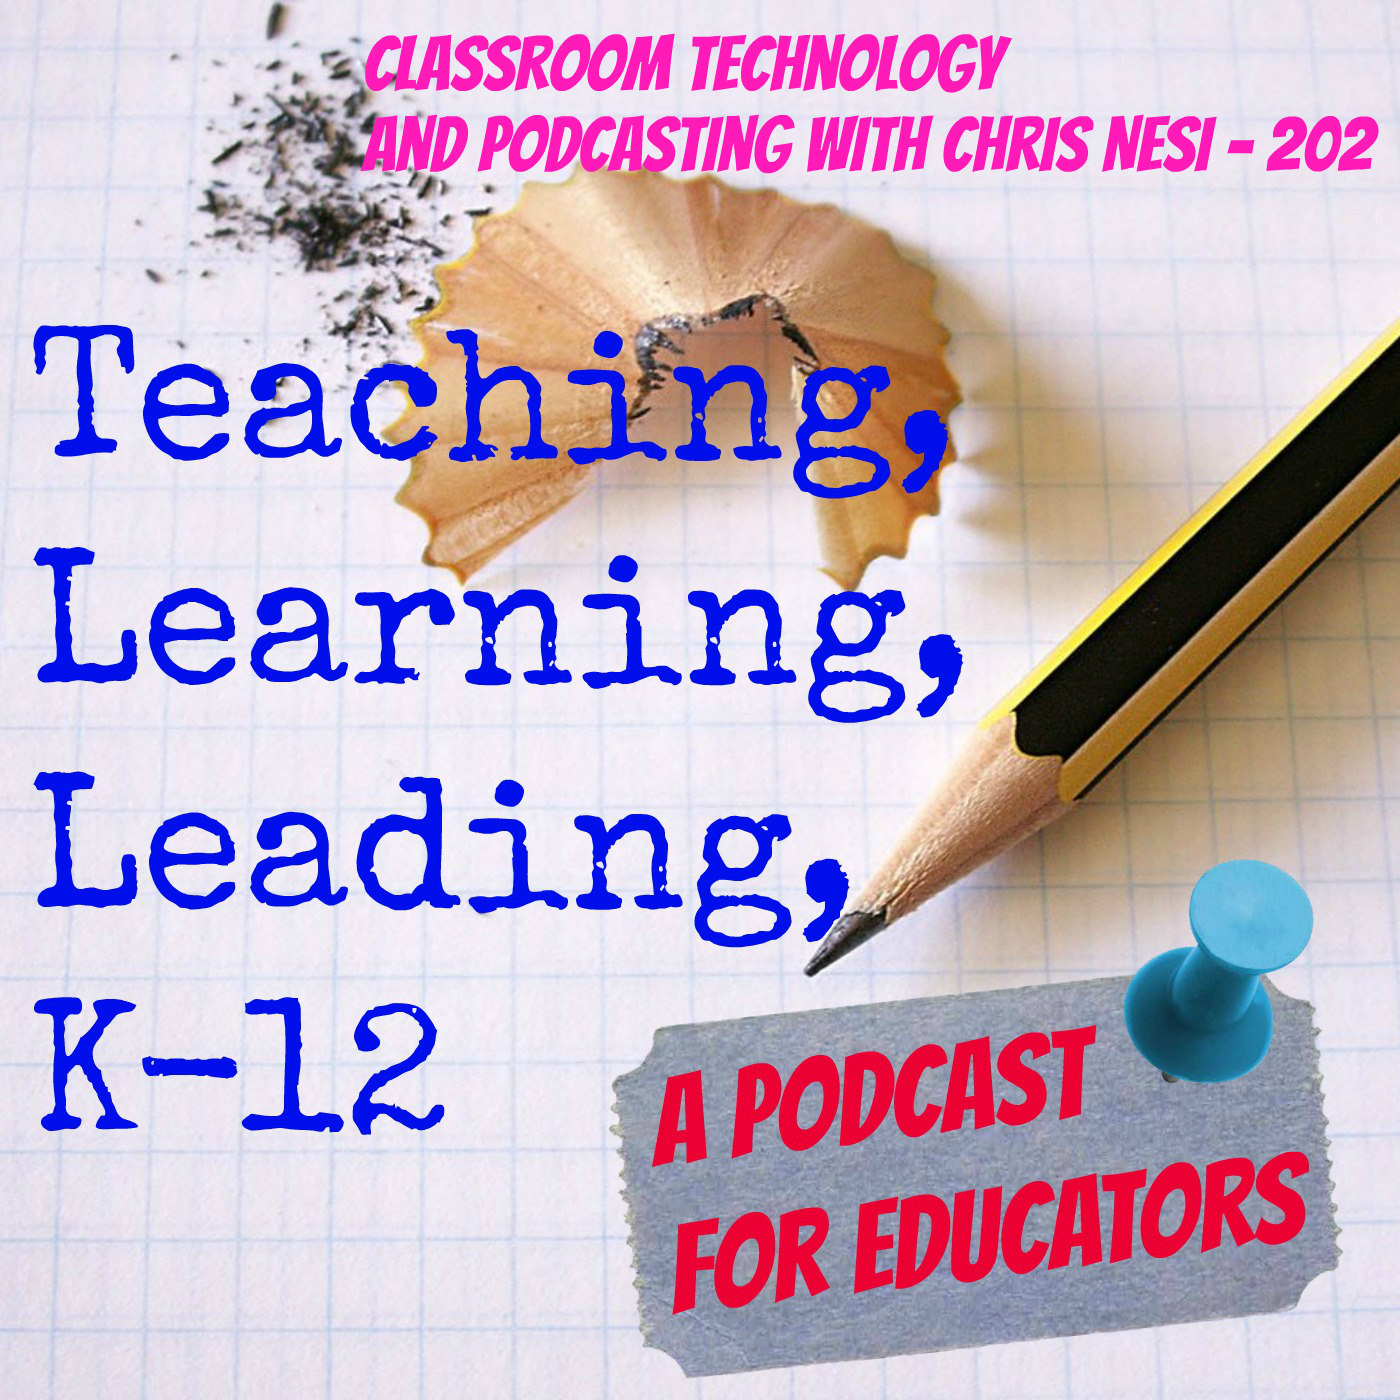 Classroom Technology and Podcasting with Chris Nesi - 202